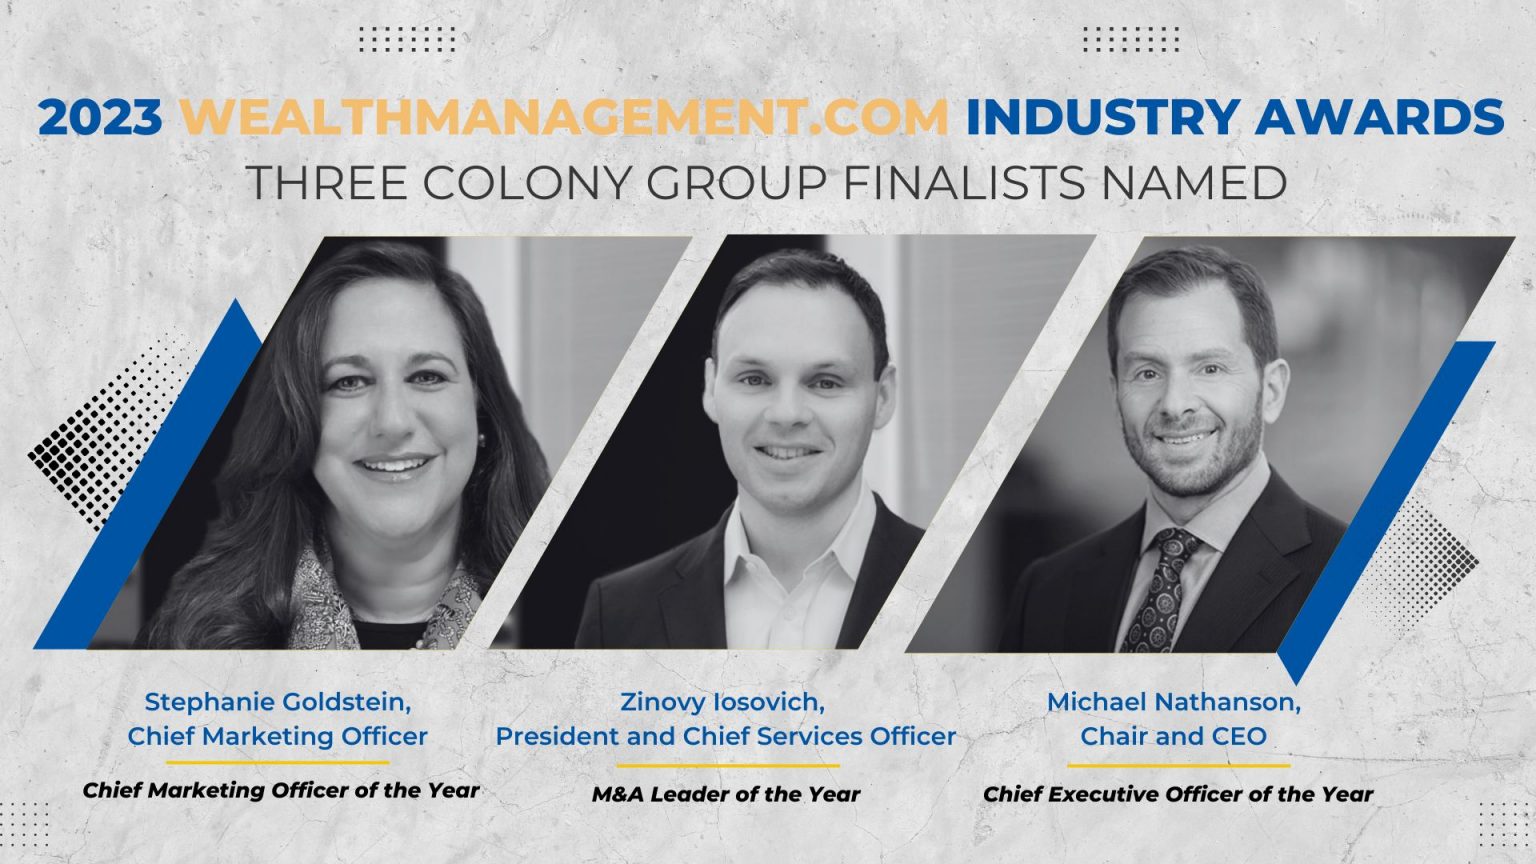 “Wealthies” 2023 Industry Awards Name Three Colony Group Finalists